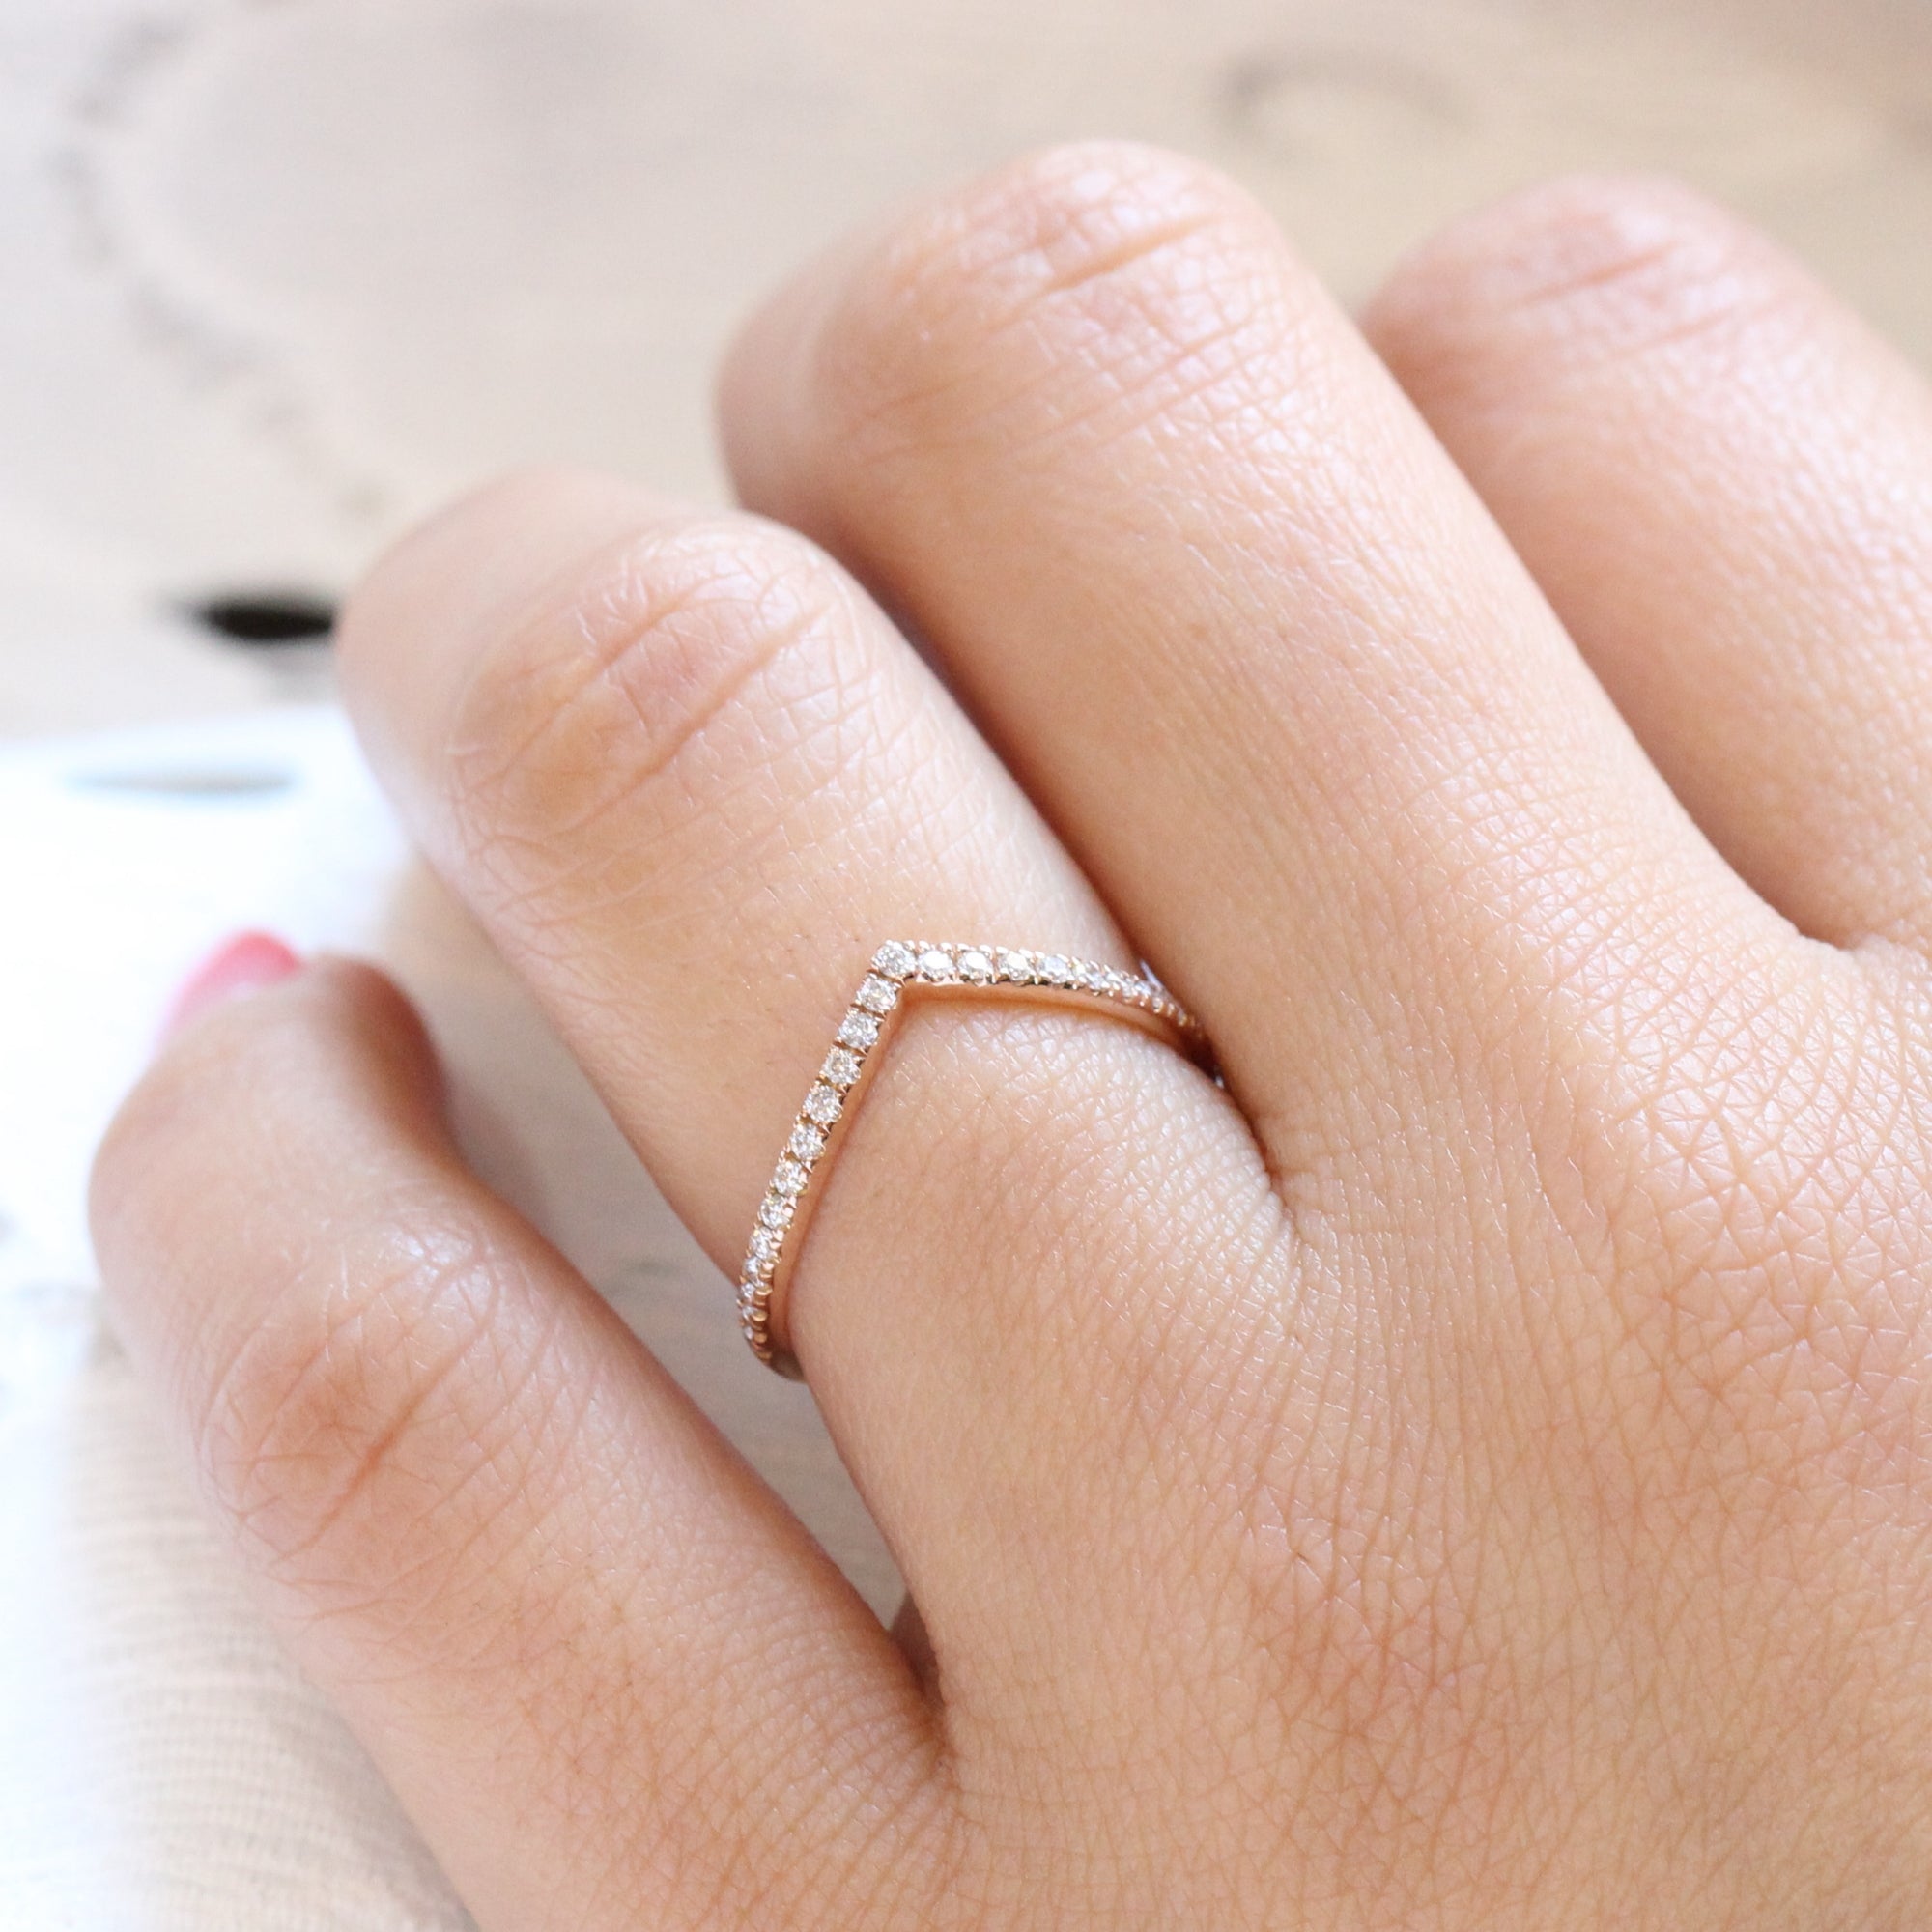 Chevron Diamond Wedding Ring in Rose Gold Curved Wedding Band by La More Design Jewelry